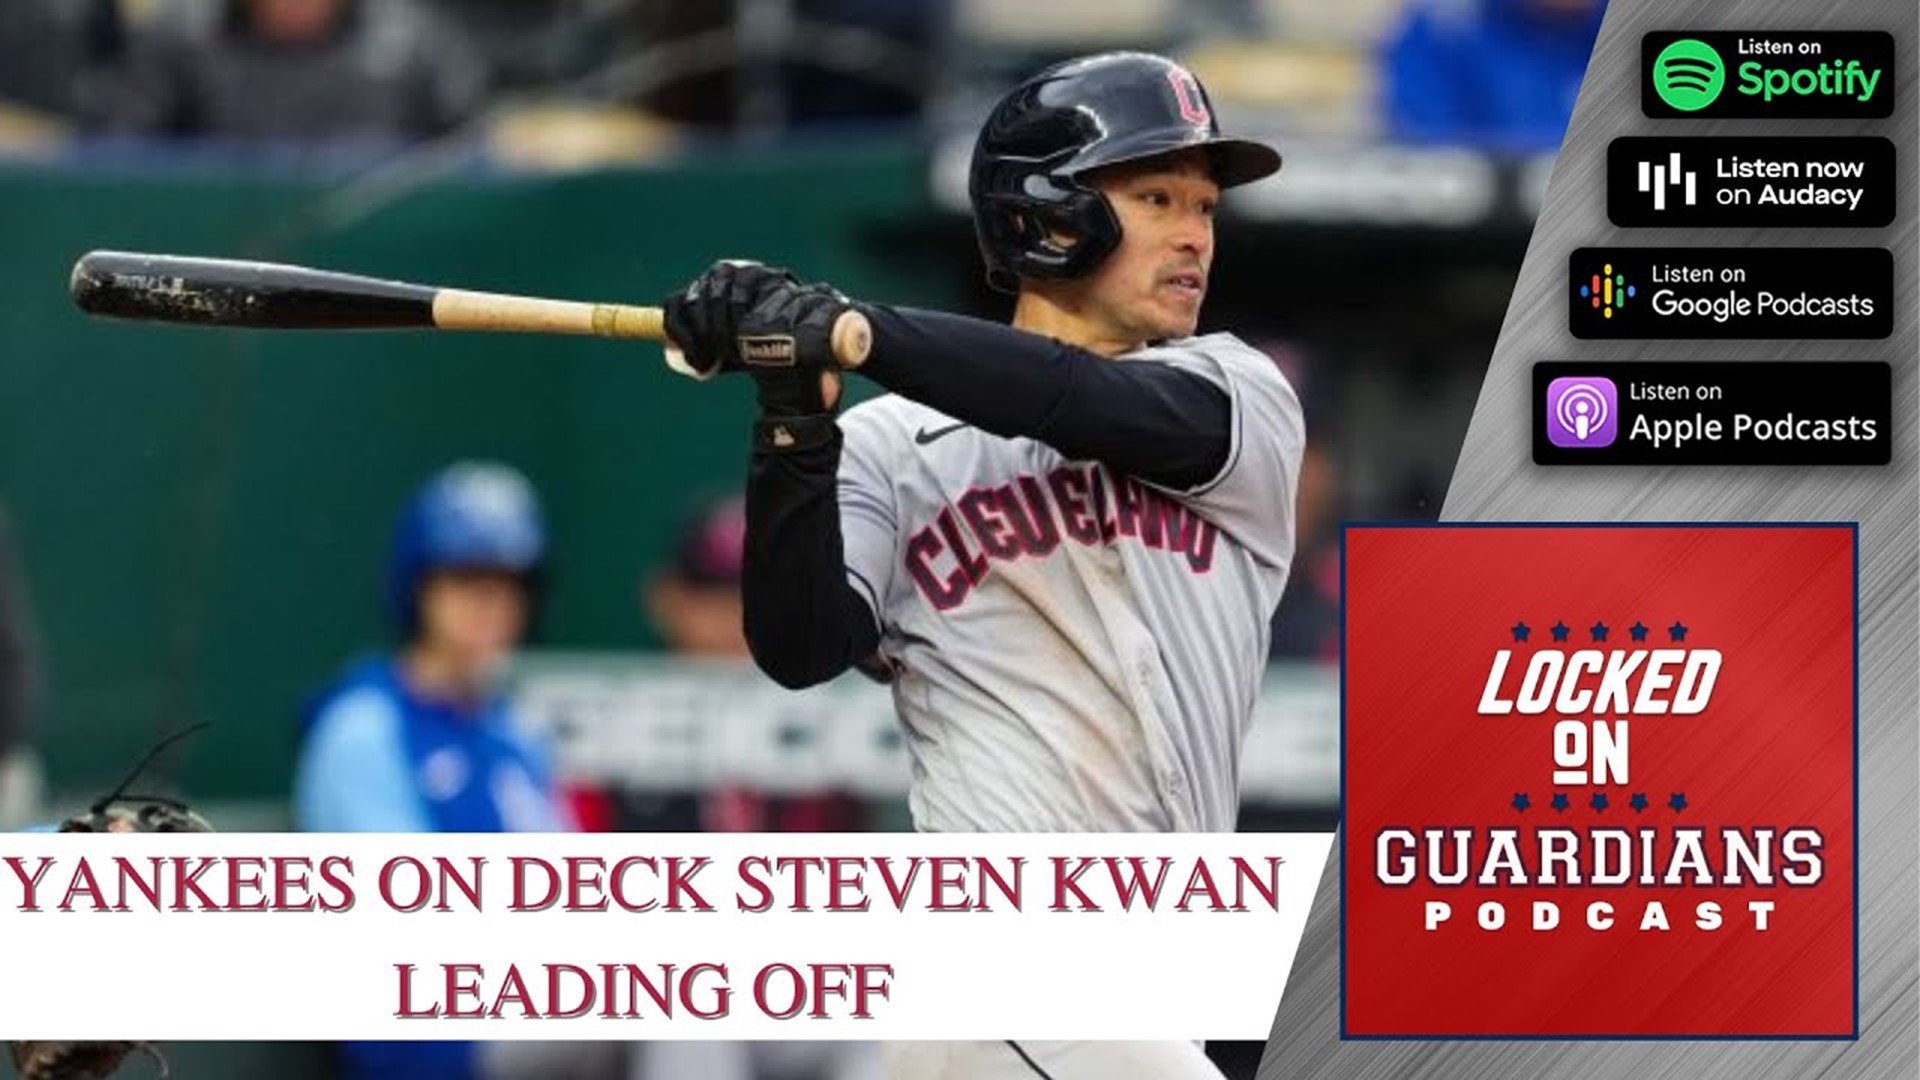 We take a closer look at the rosters for both the Cleveland Guardians and New York Yankees heading into the American League Division Series.